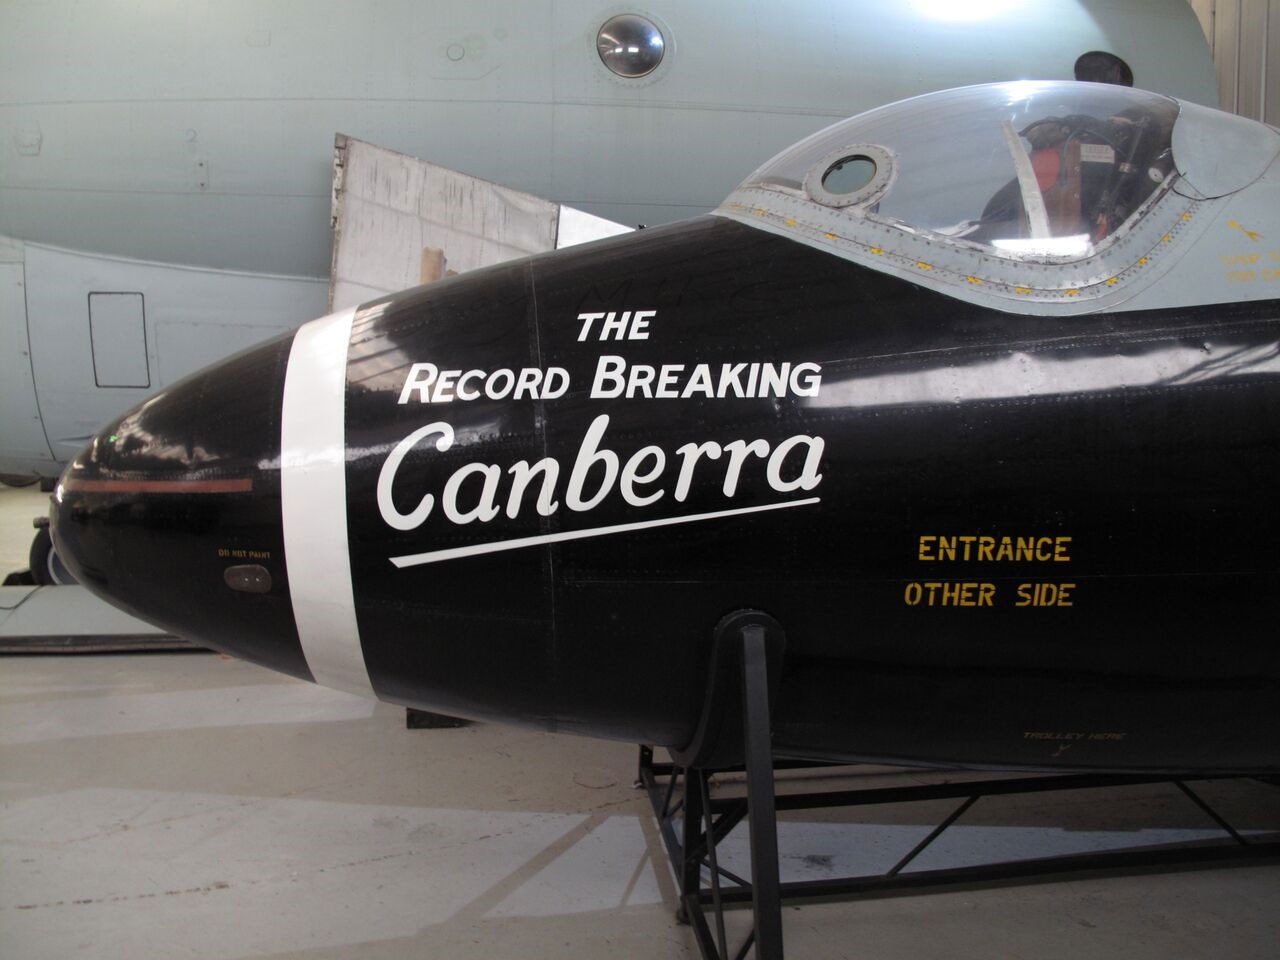 The nose section of a black Canberra aircraft. The side of the aircraft reads 'The record-breaking Canberra, entrance other side.'